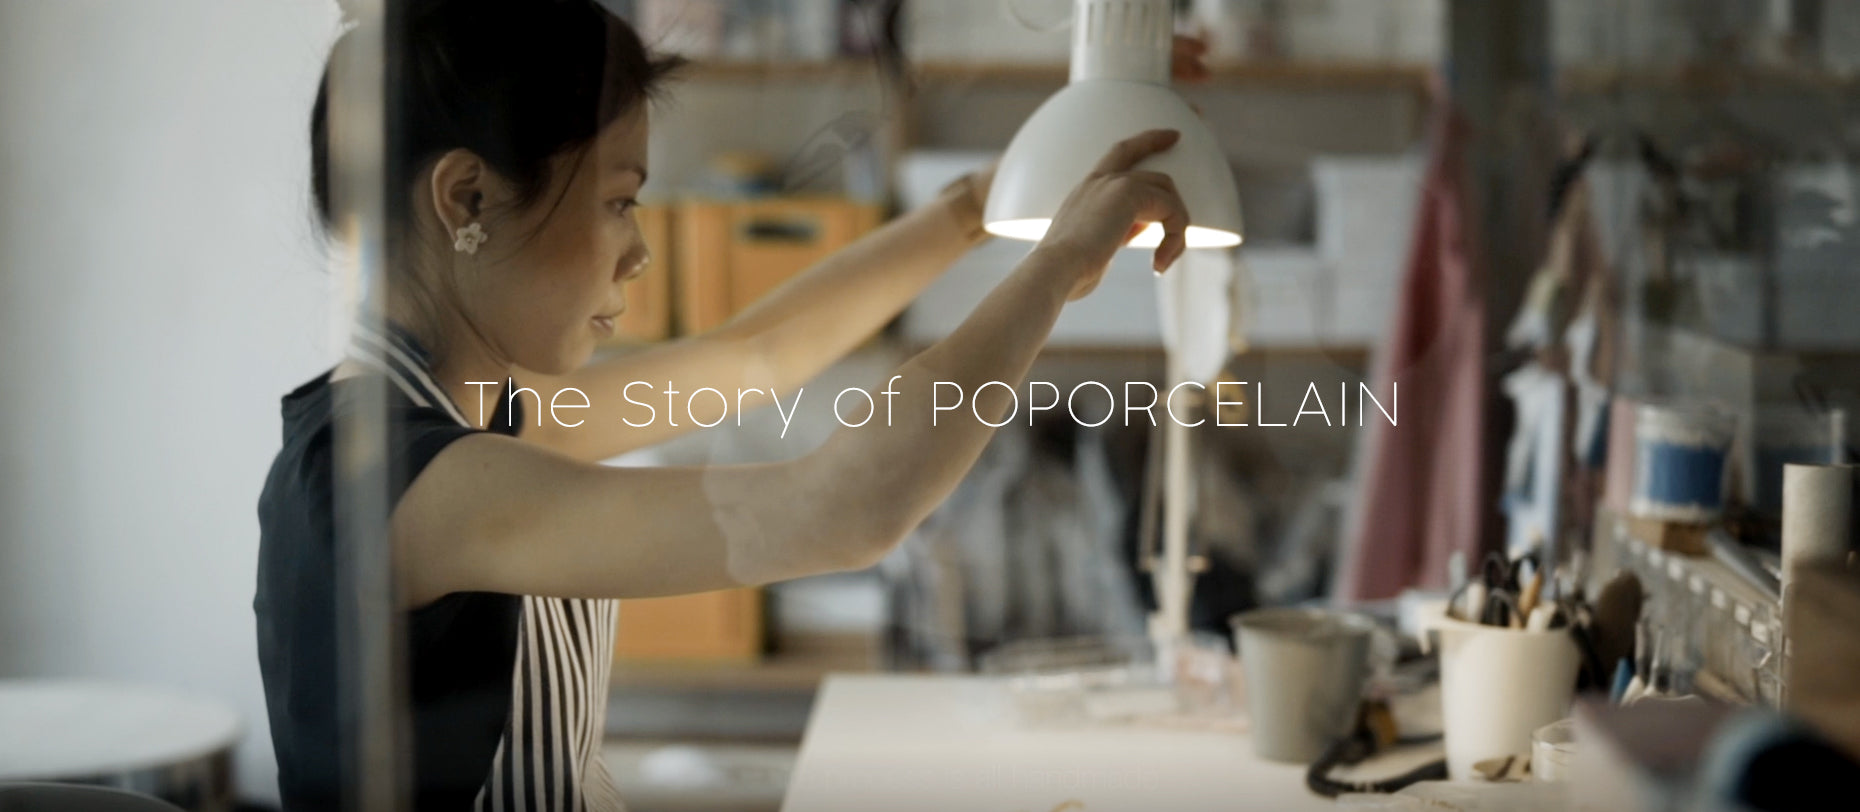 Load video: The story of POPORCELAIN